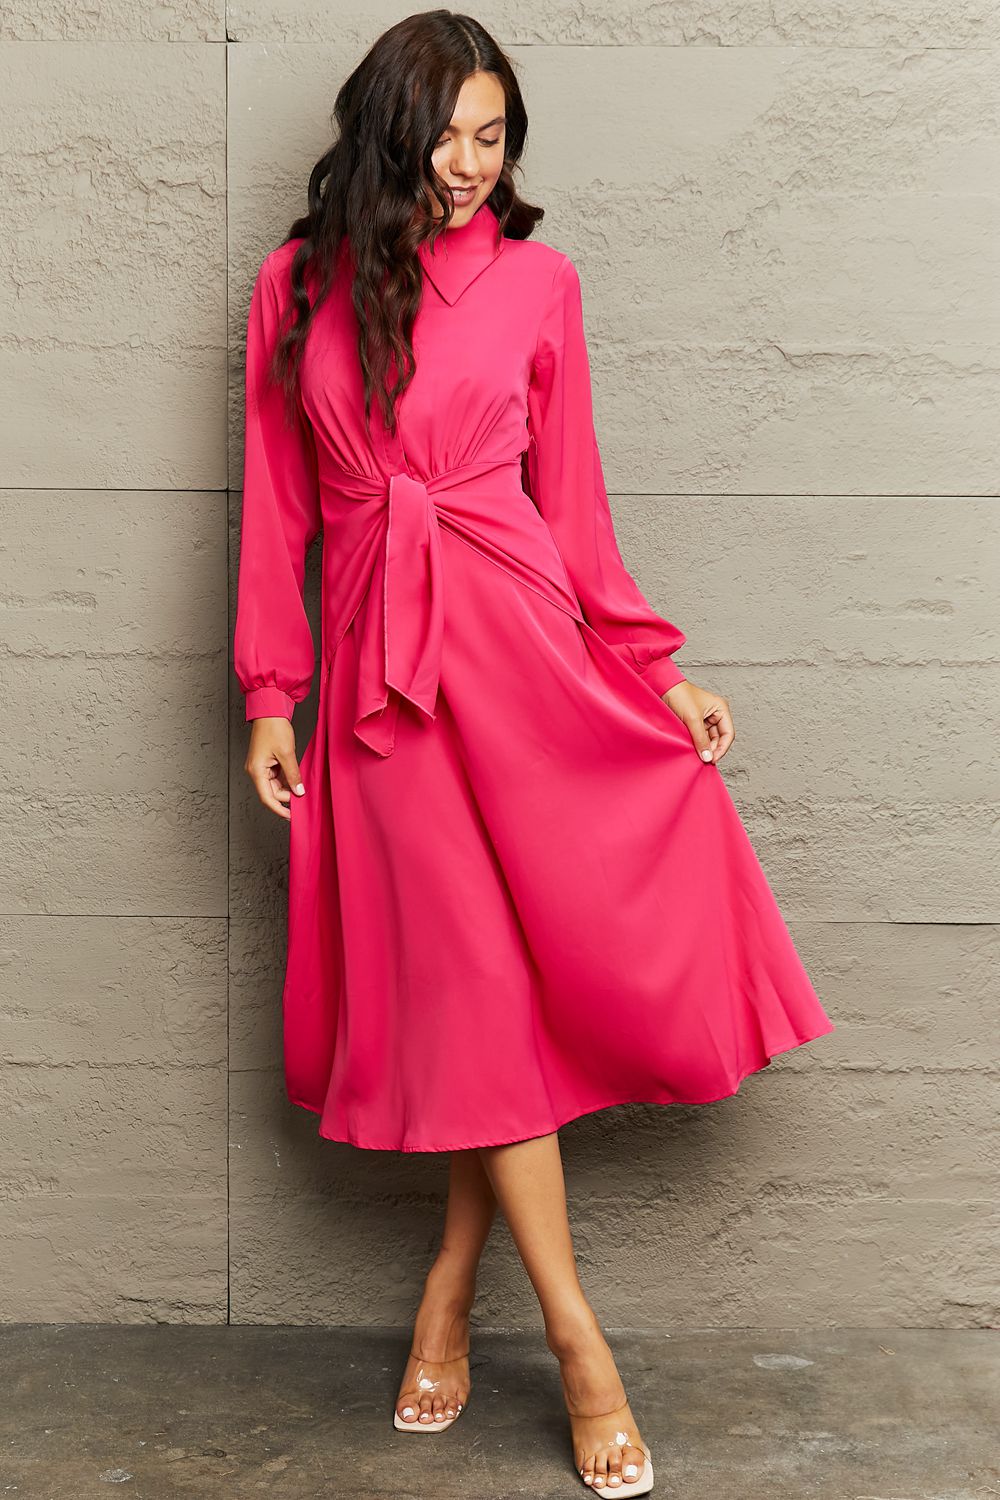 Collared Neck Long Sleeve Twisted Midi Dress - Cowtown Bling N Things